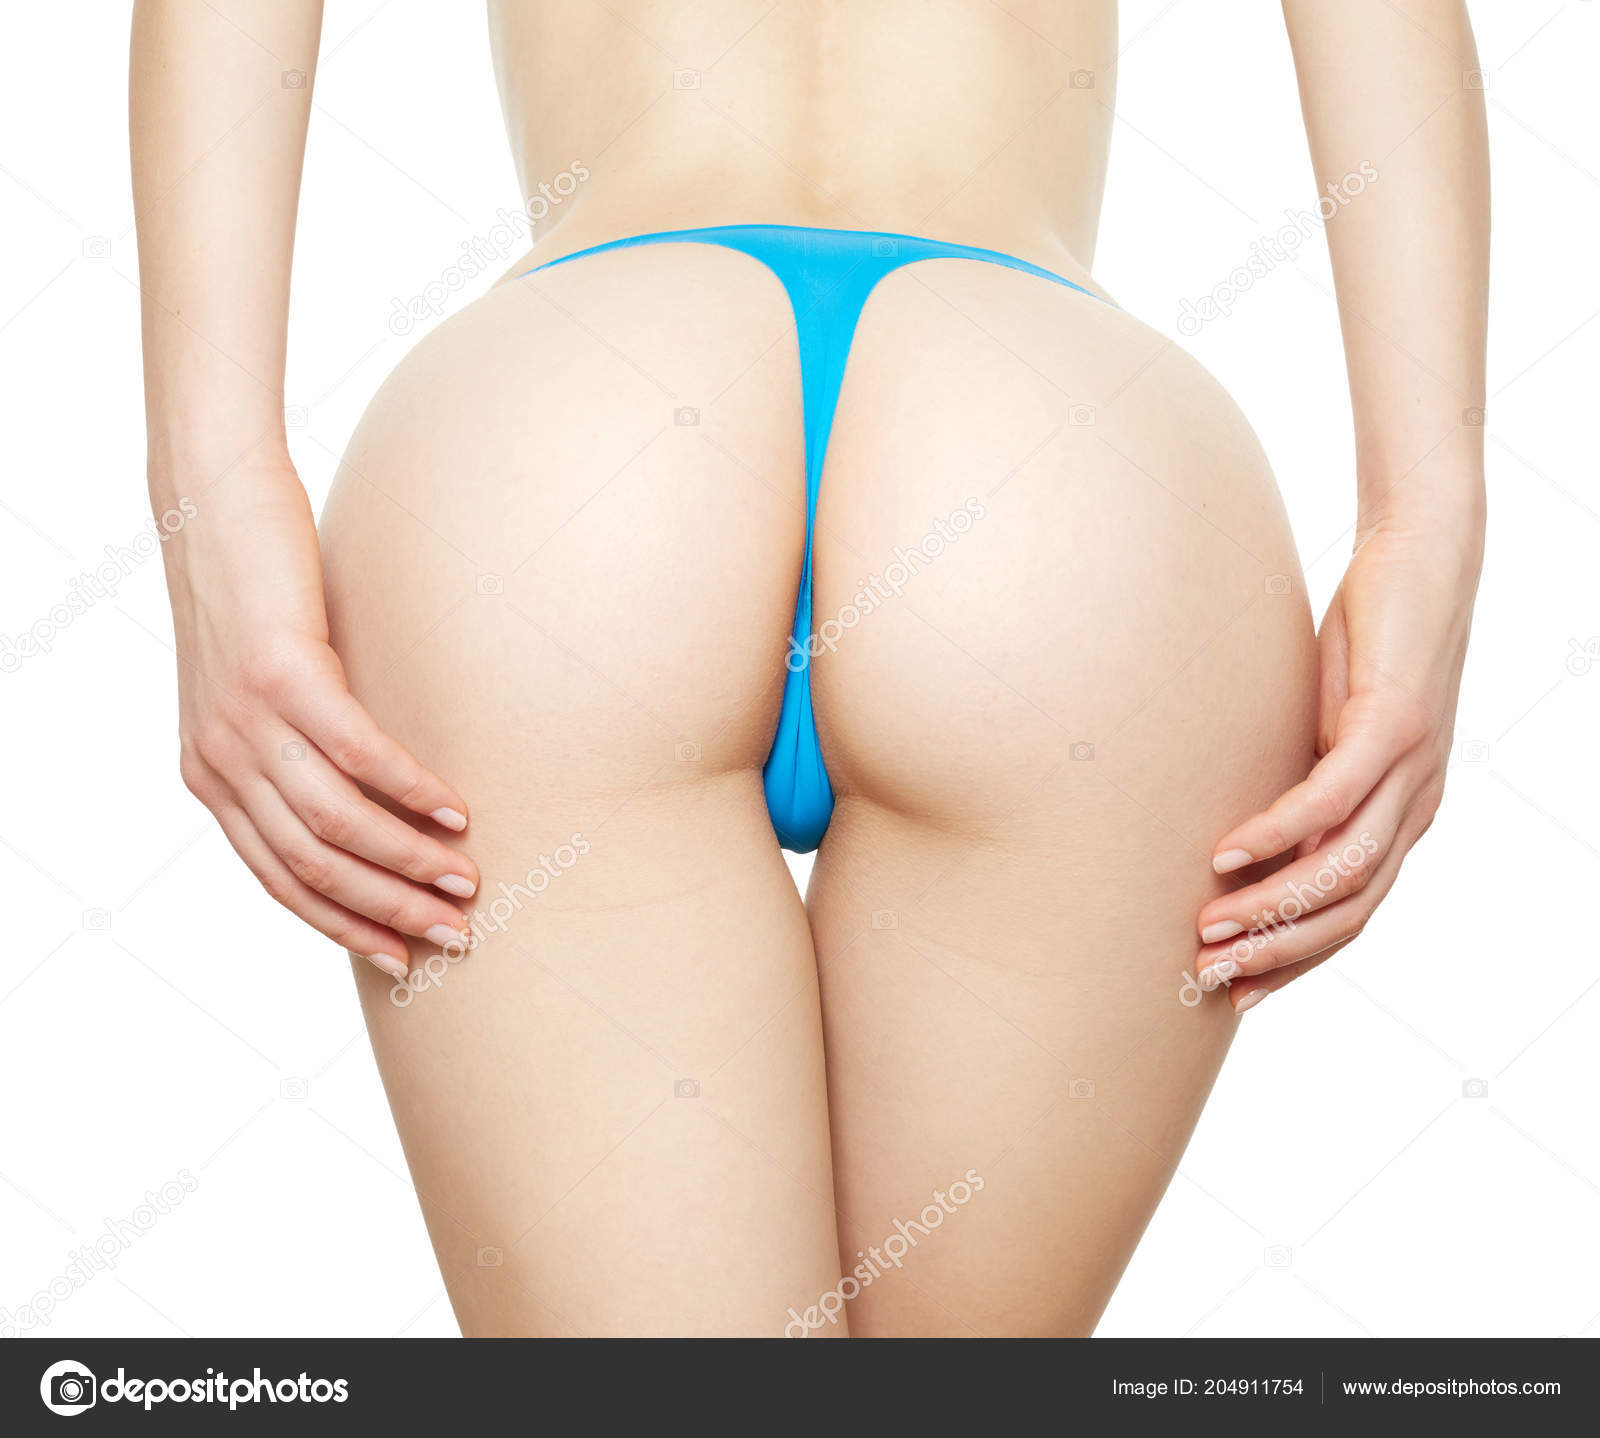 The Perfect Female Ass